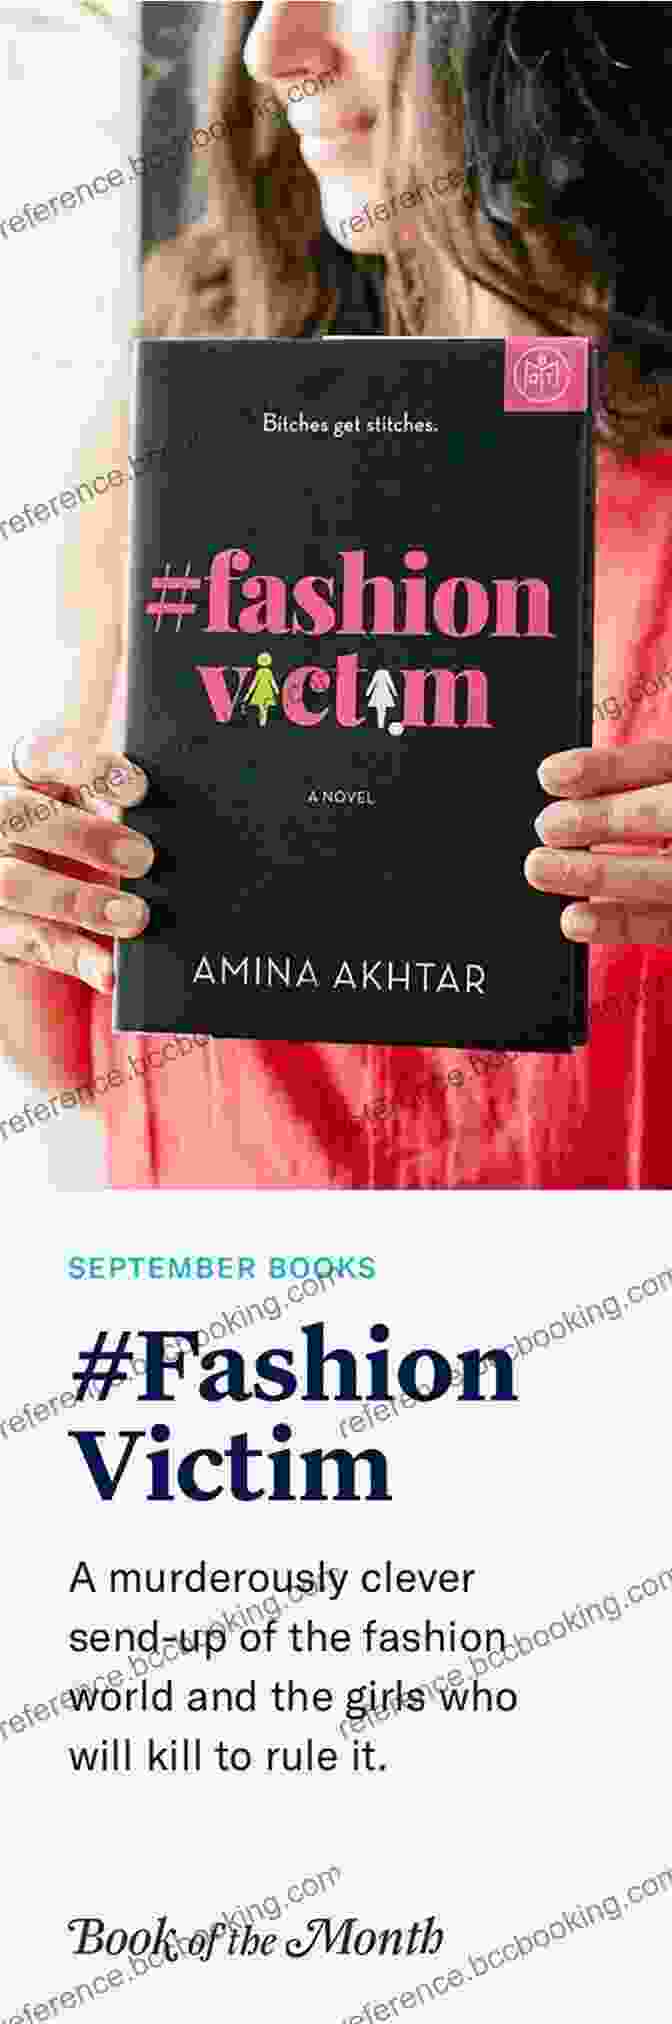 Fashionvictim Book Cover Featuring A Woman In A Glamorous Dress With A Shadow Over Her Eyes #FashionVictim: A Novel Amina Akhtar